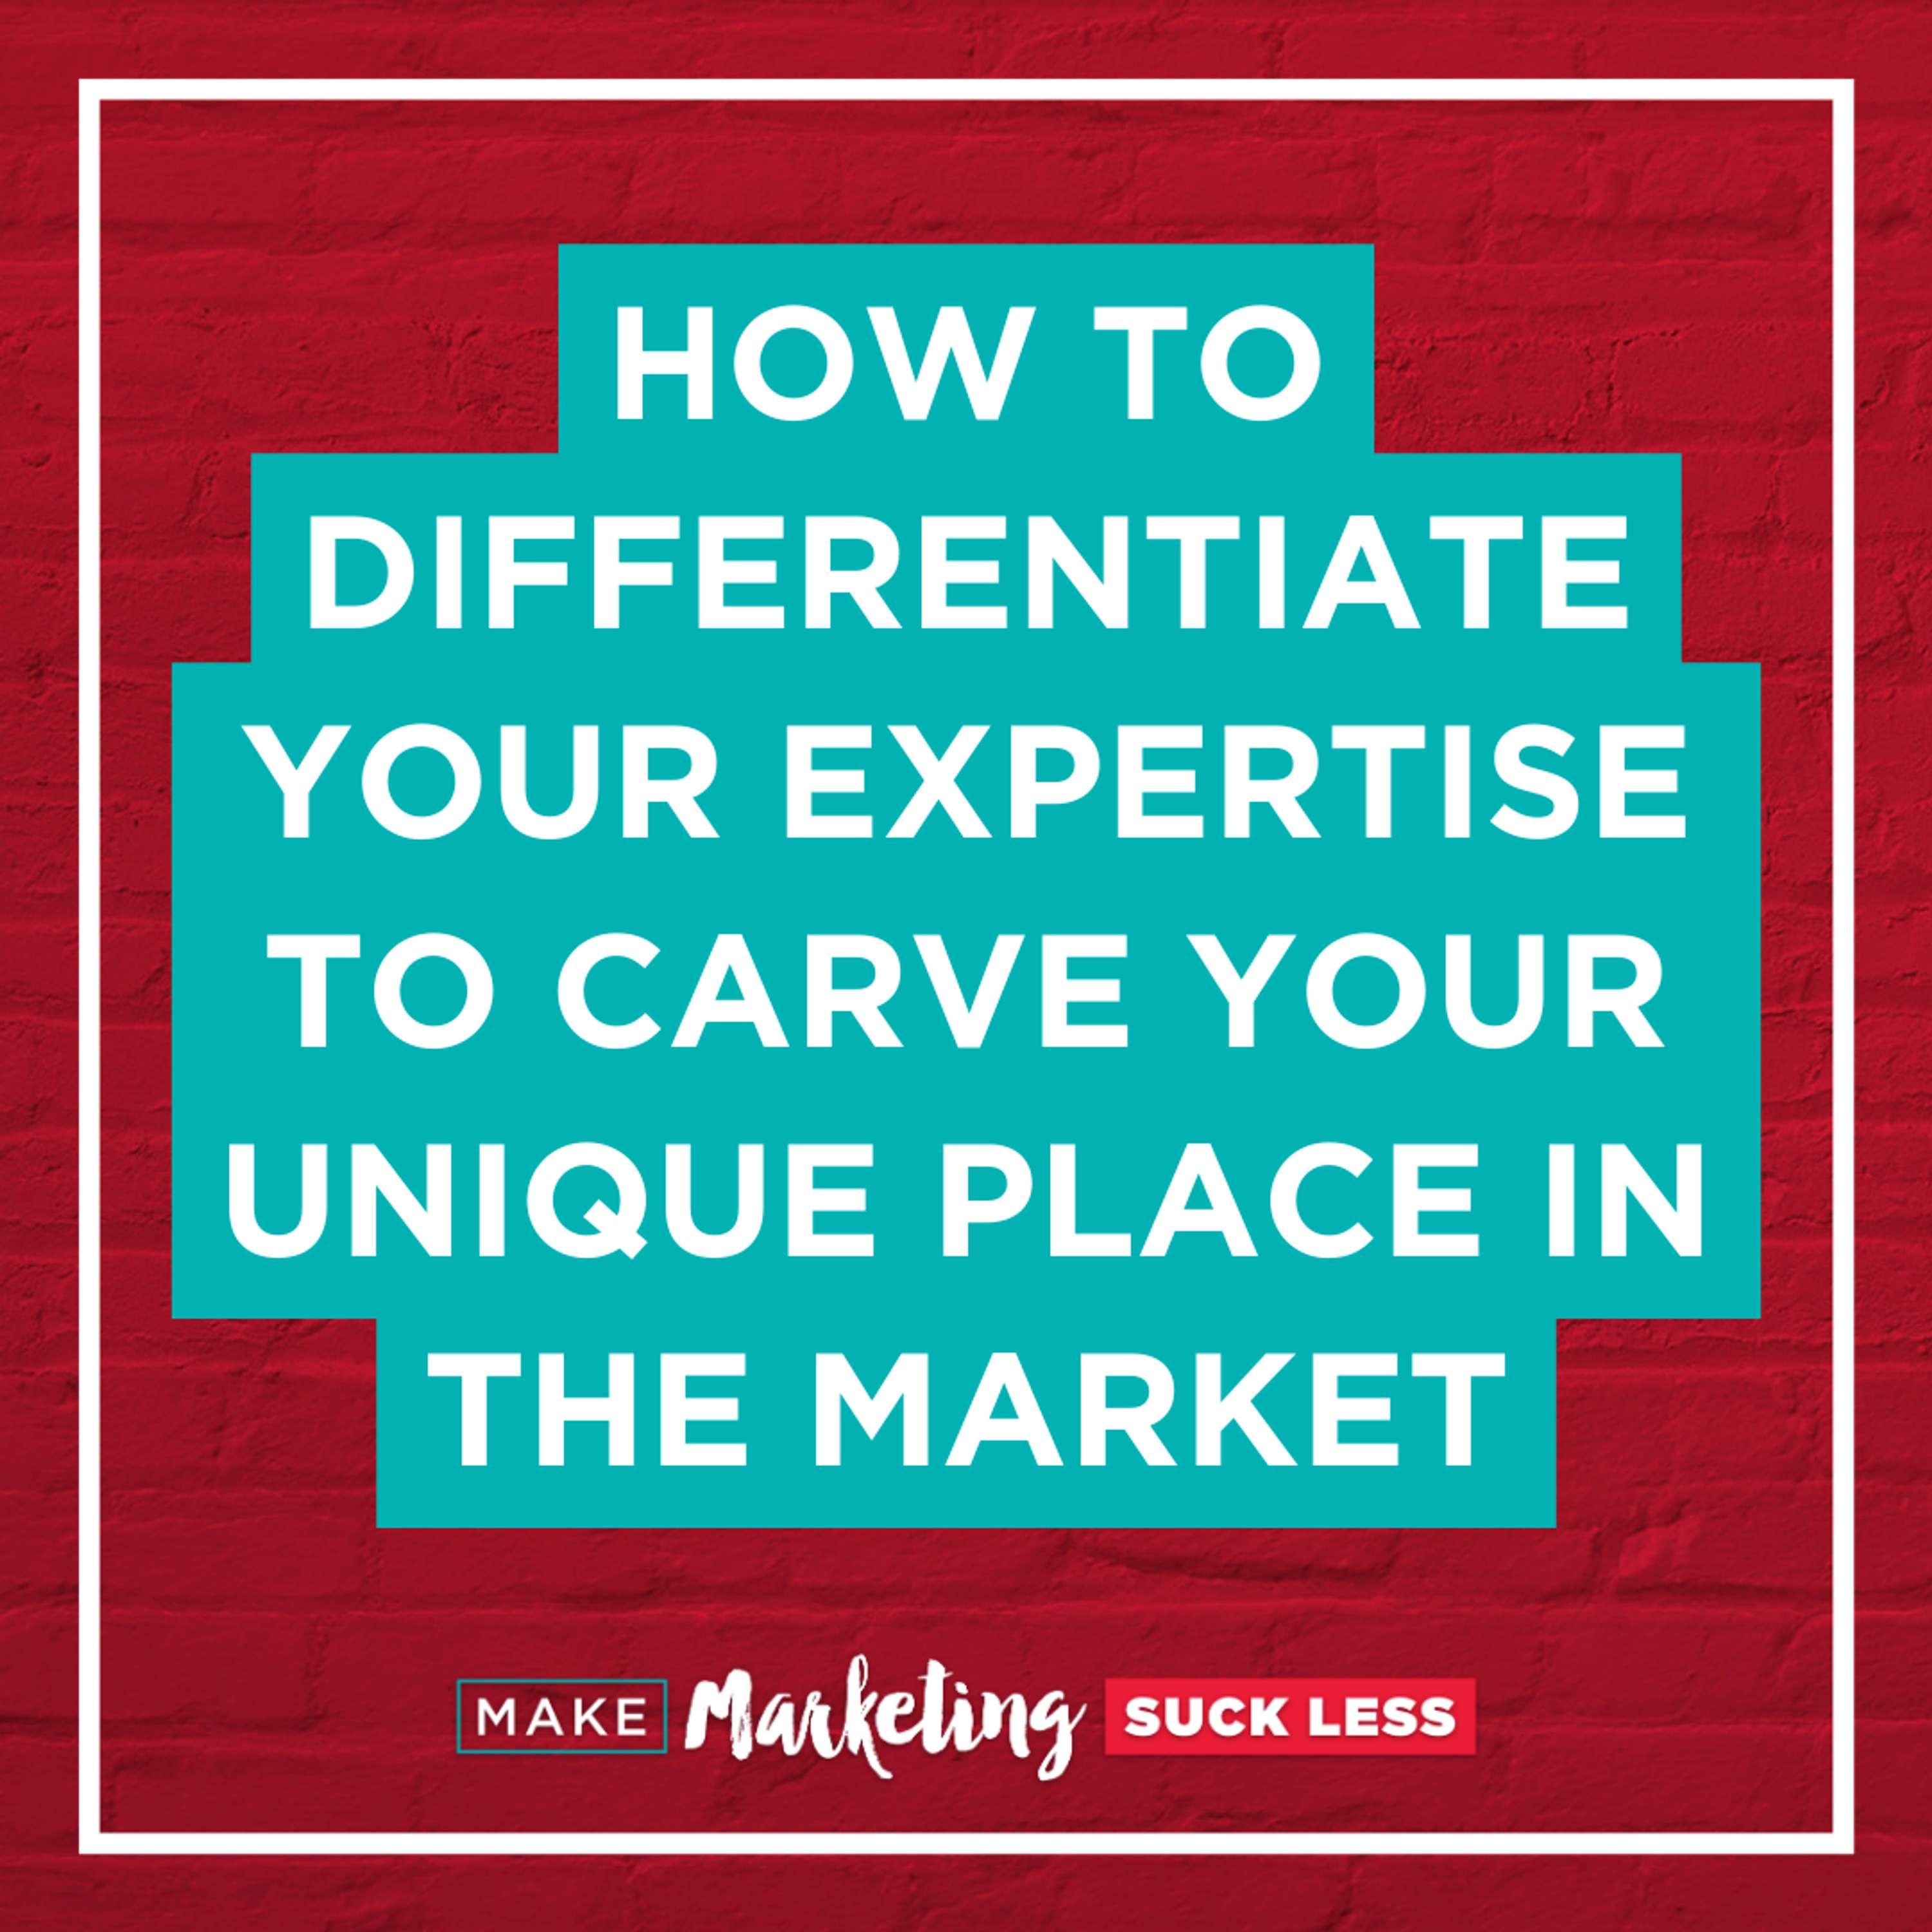 How To Differentiate Your Expertise To Carve Your Unique Place In The Market